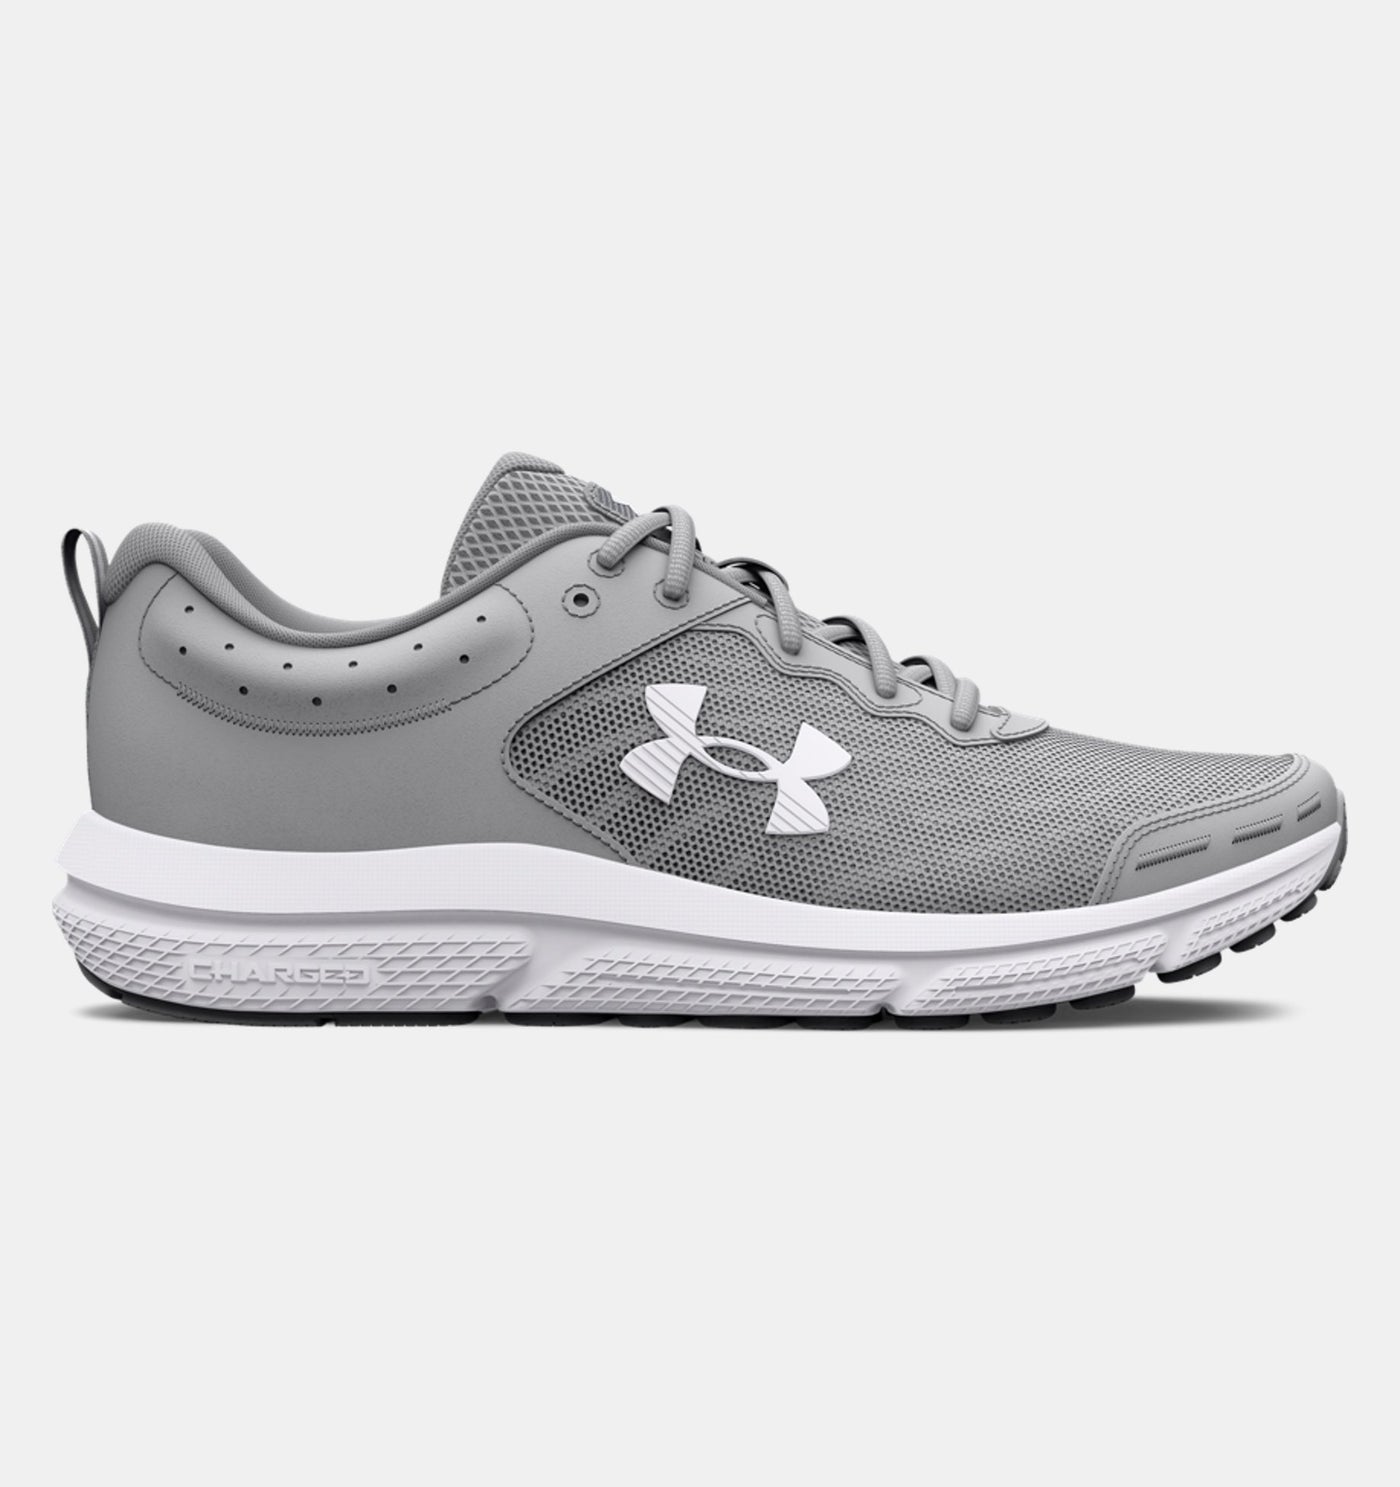 Under Armour Charged Assert 10 3026175-102 Training Running Athletic Shoes  Mens